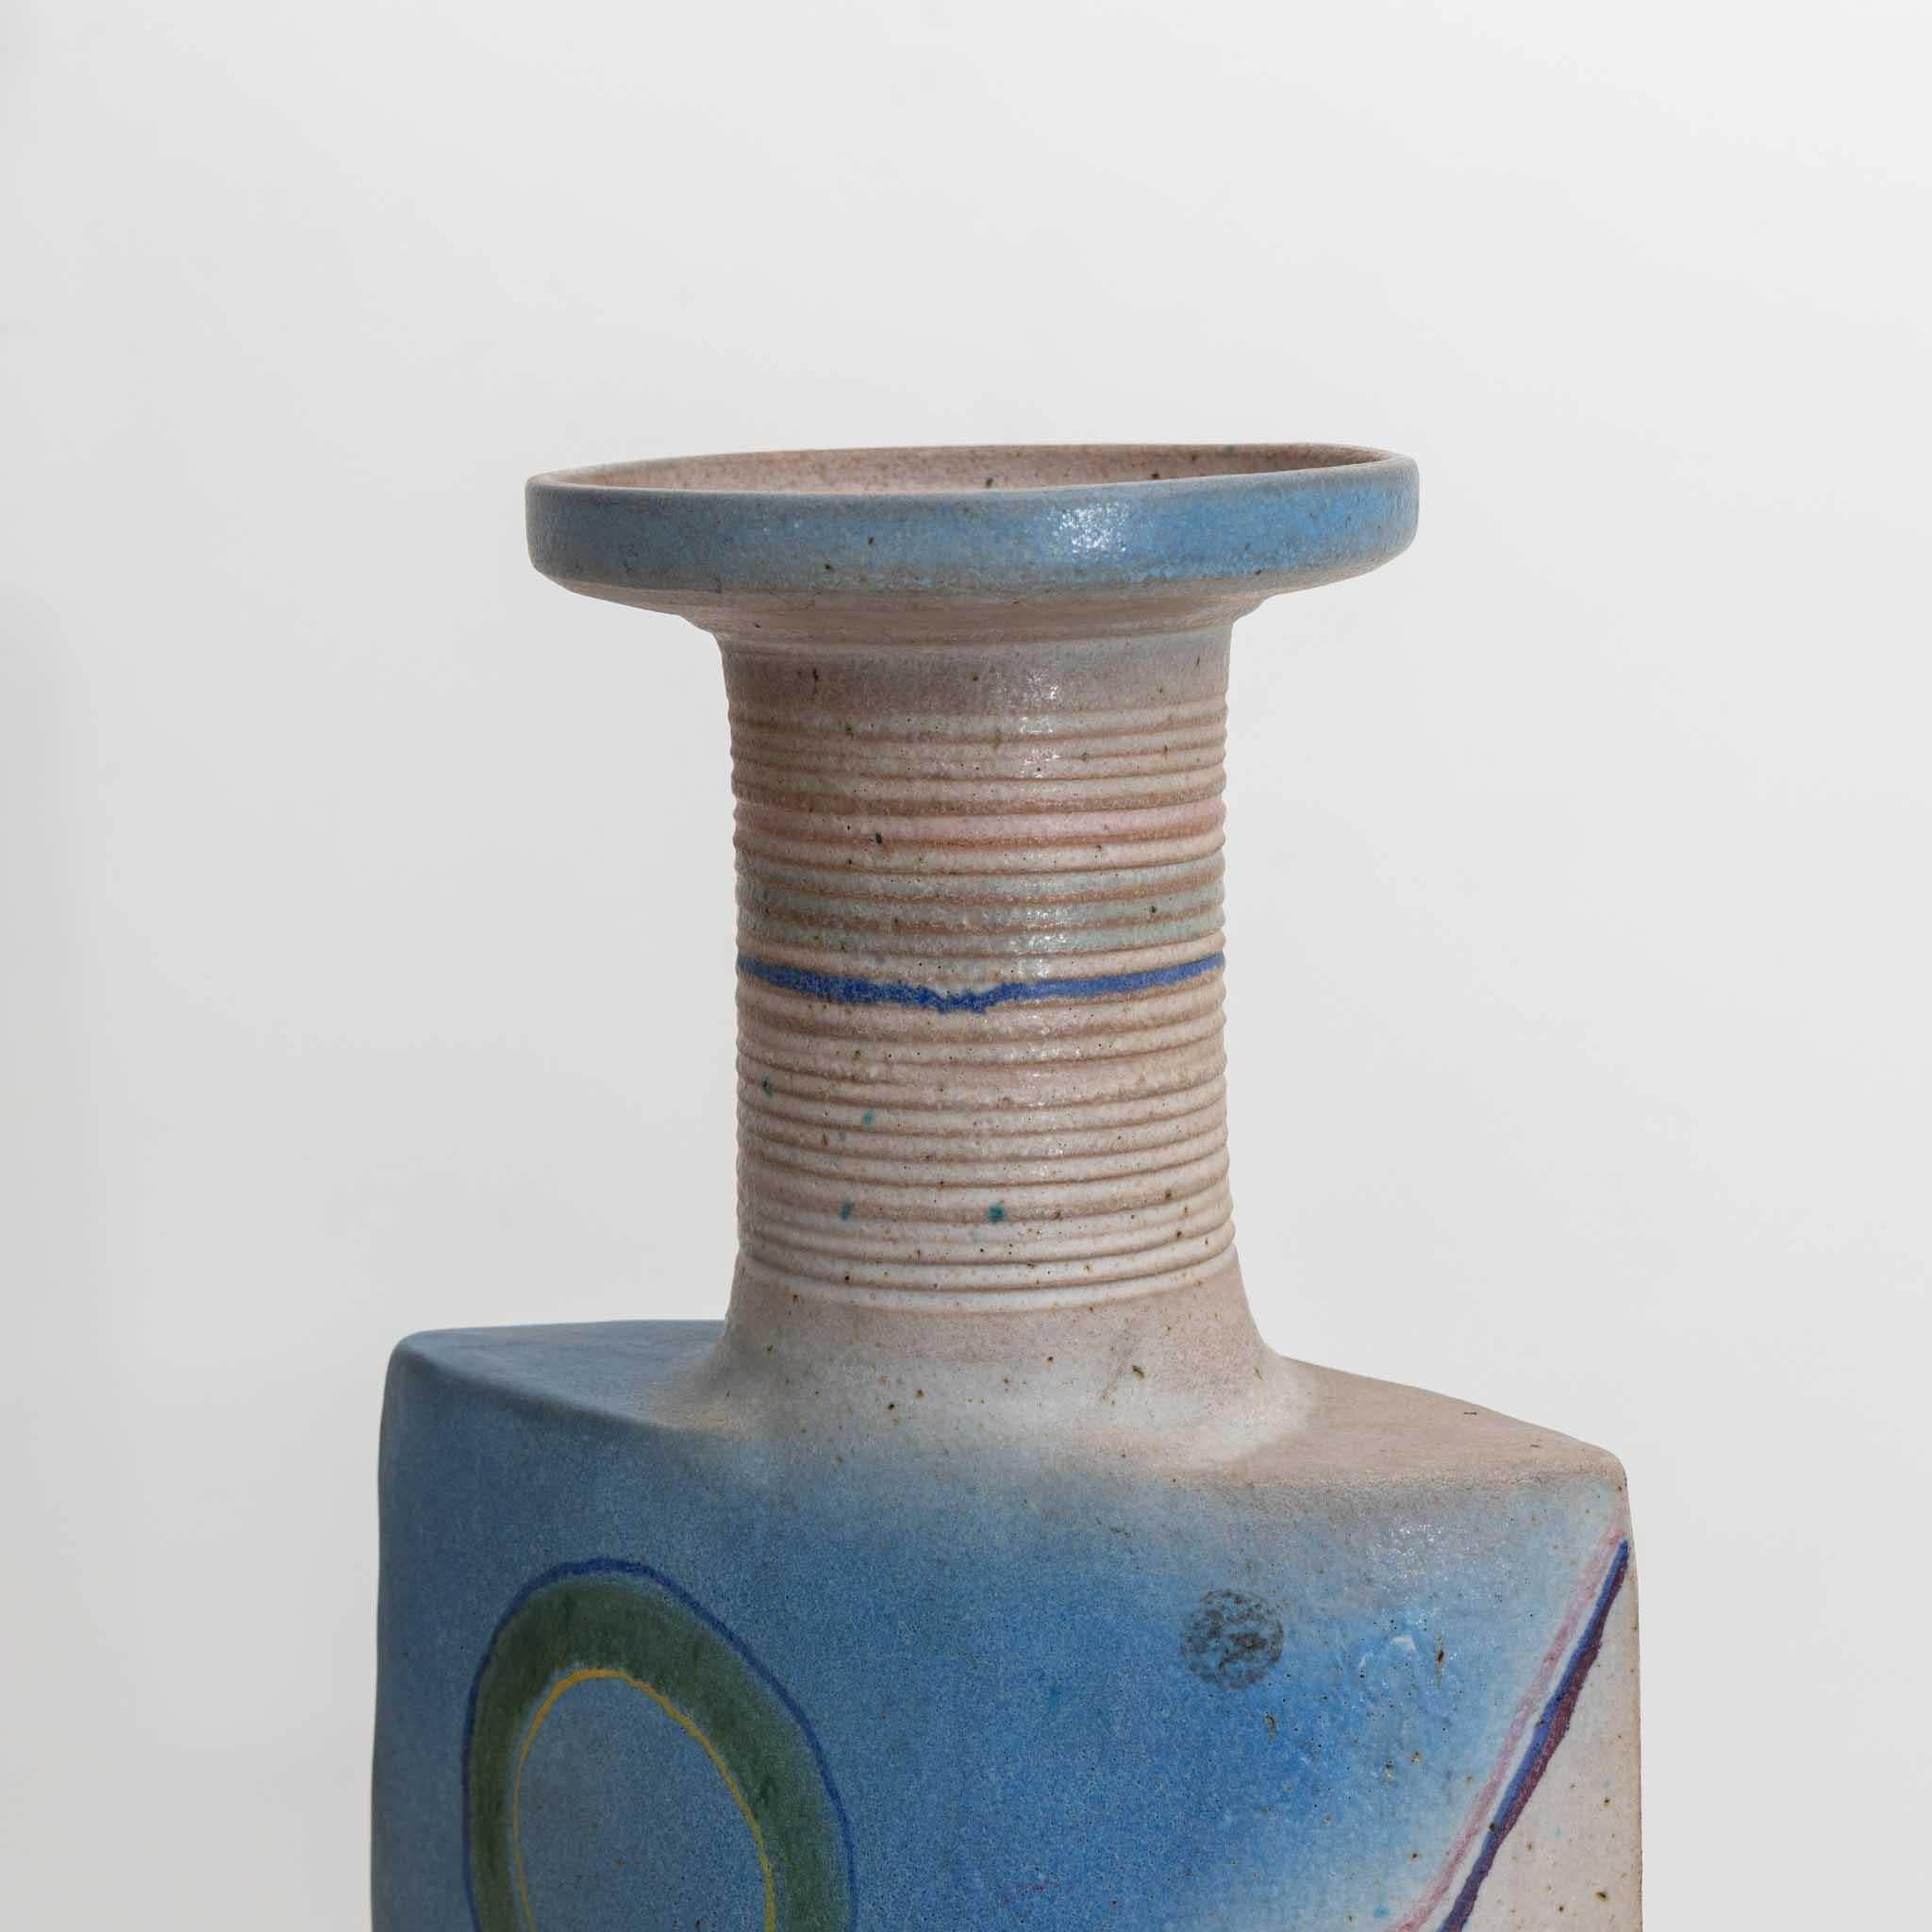 Large vase with trapezoidal curved wall and cylindrical neck with wide lip. The vase is made of ceramic and has a blue décor.